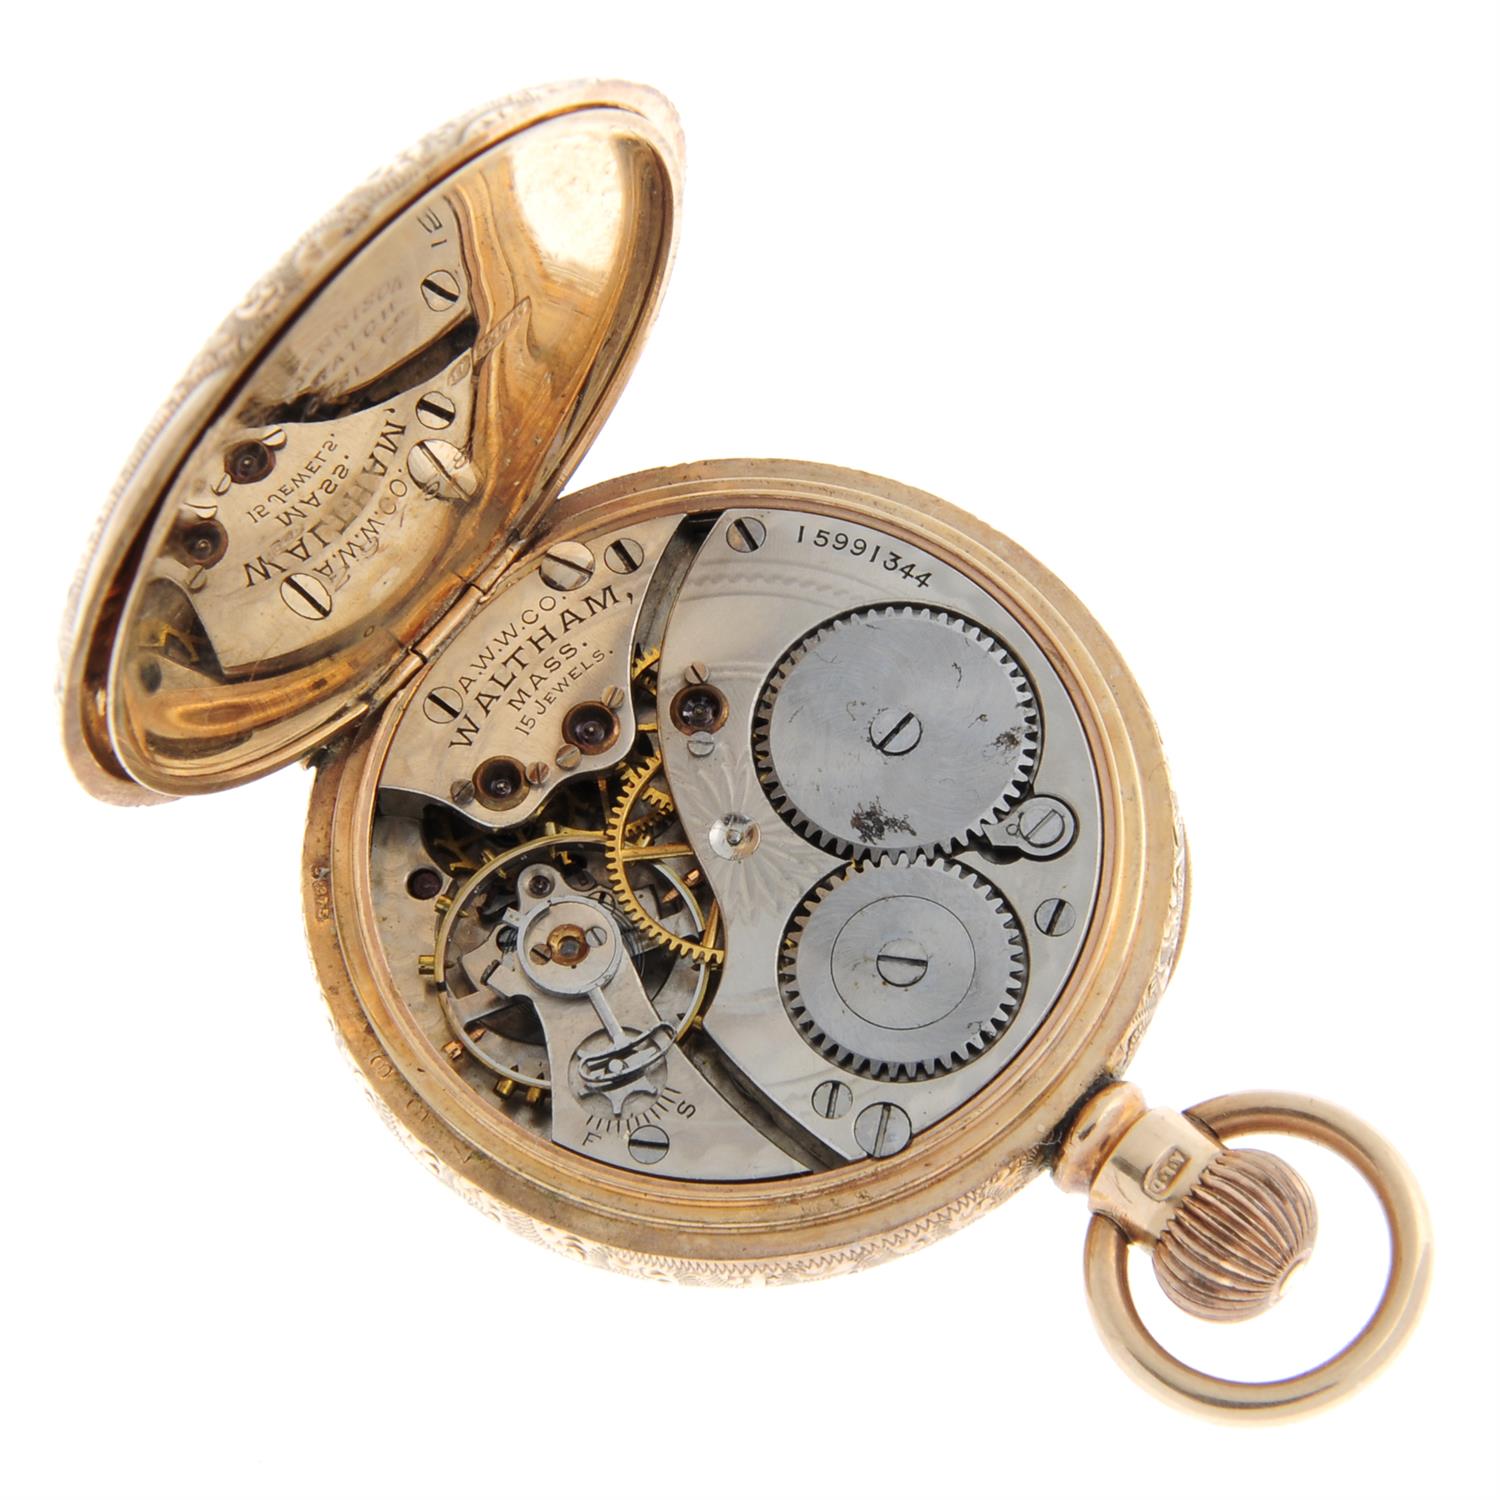 An open face pocket watch by Waltham, 33mm. - Image 3 of 3